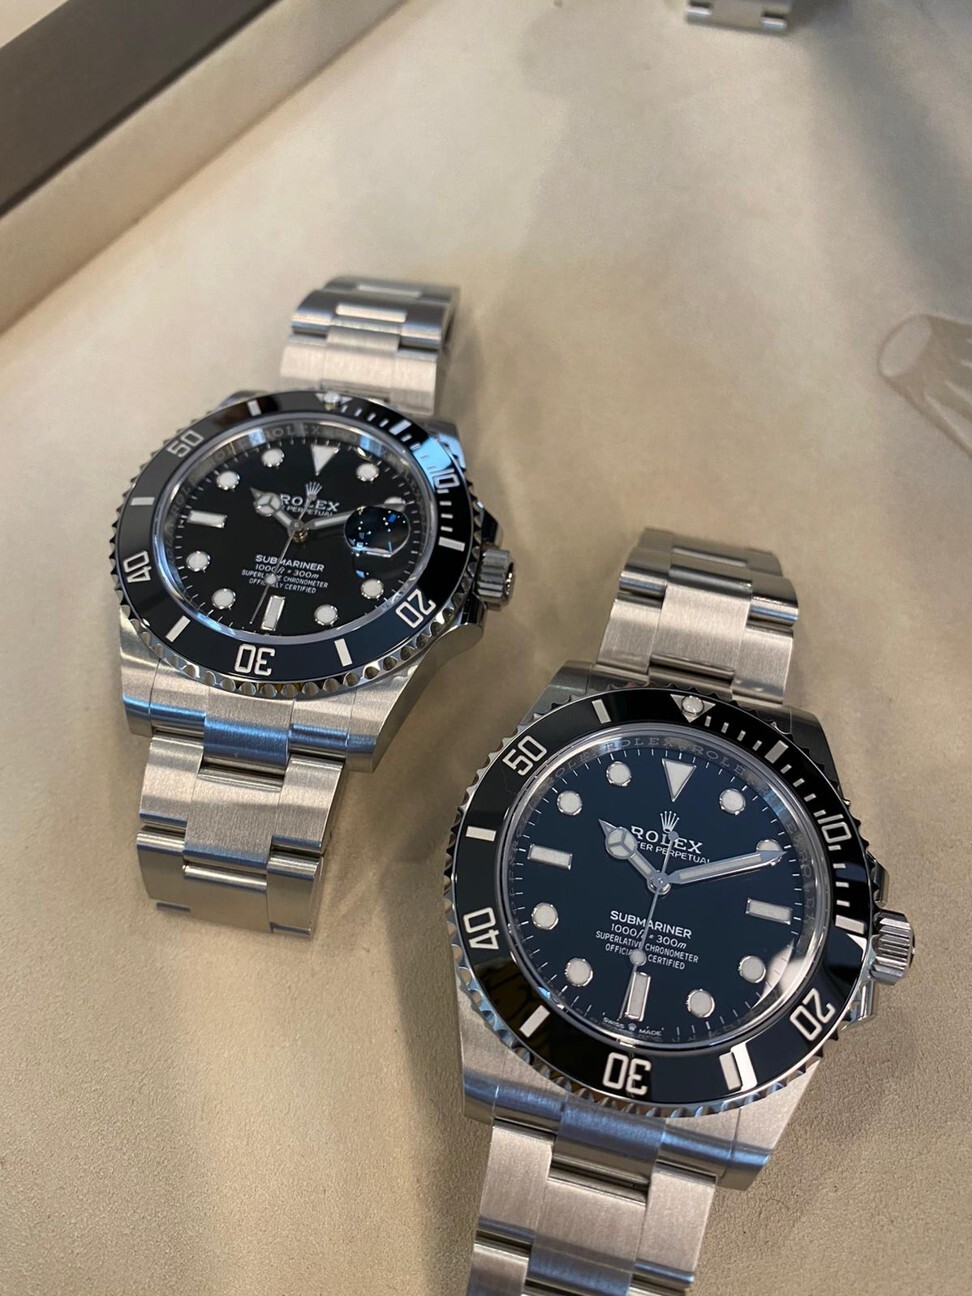 🌀Wrist roll🌀Wednesday featuring the latest 2020 Rolex Submariner